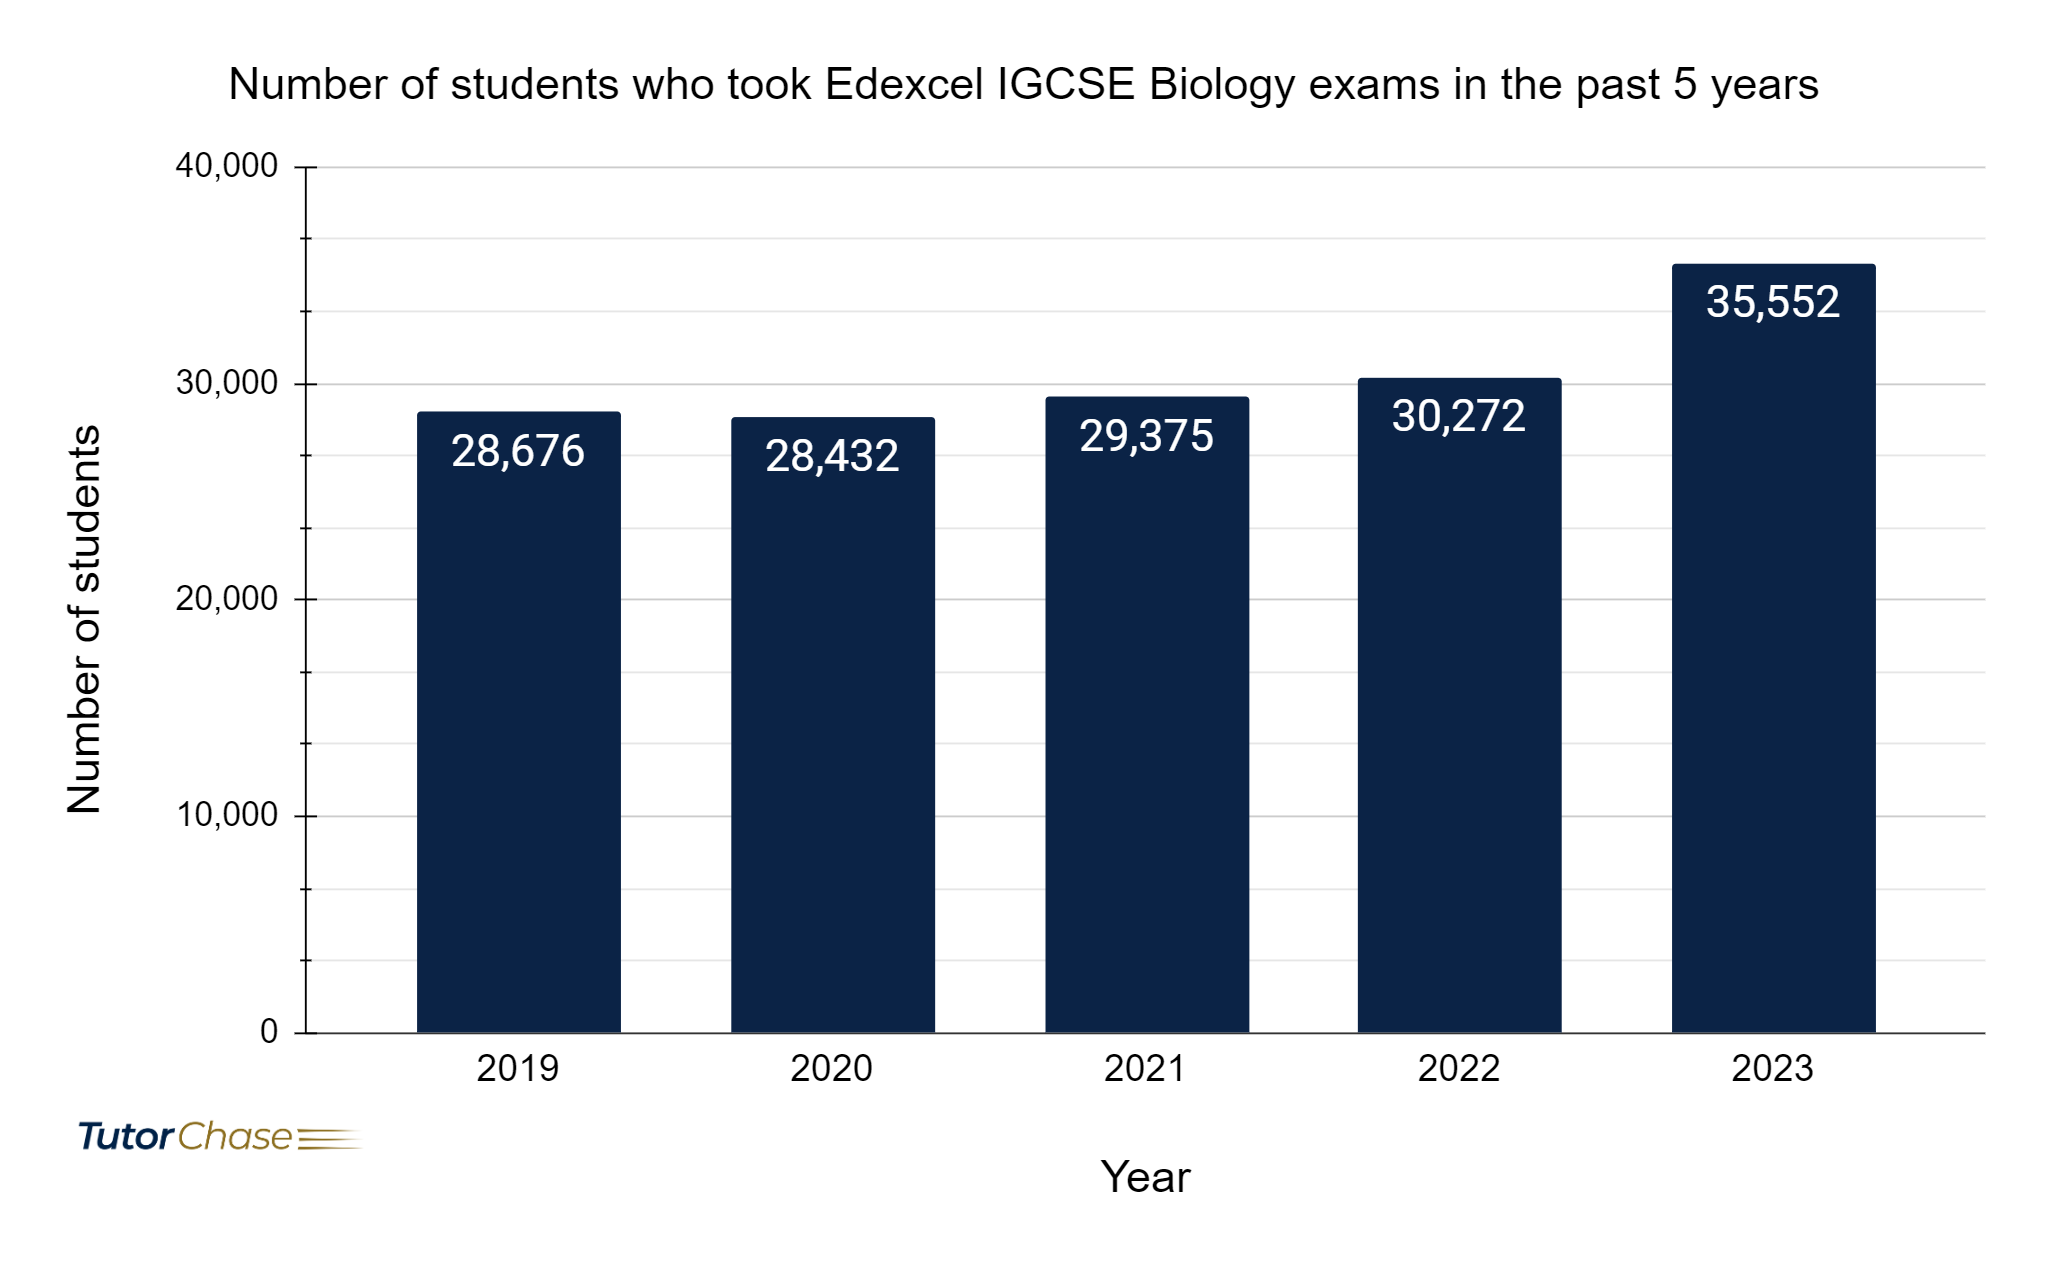 Number of students who took Edexcel IGCSE Biology exams in the past 5 years